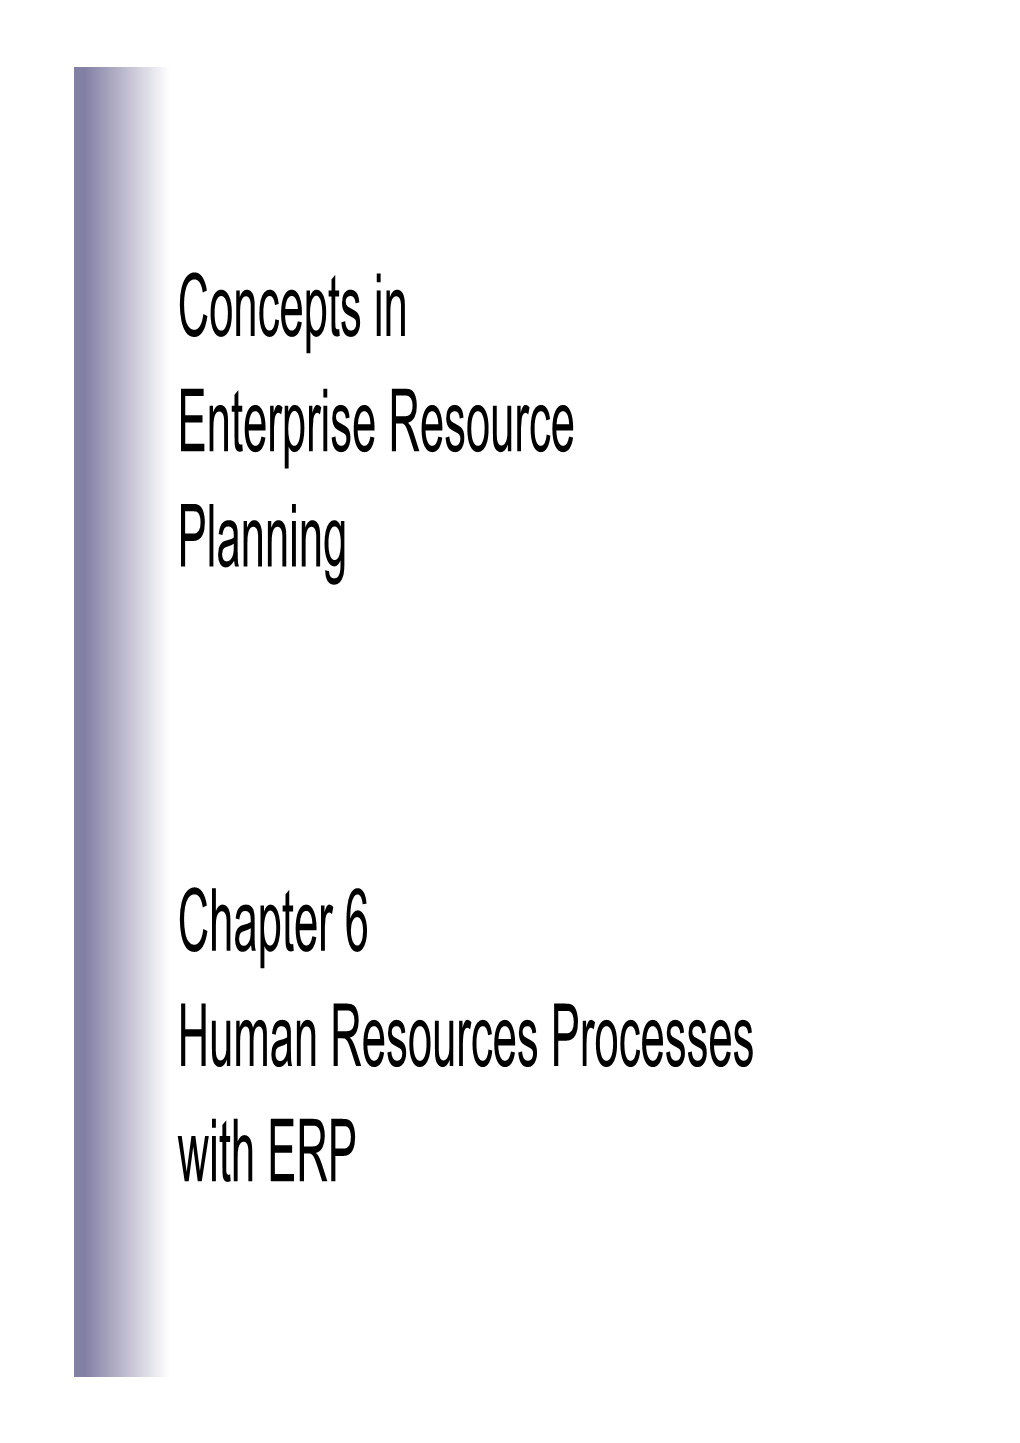 Concepts in Enterprise Resource Planning Chapter 6 Human